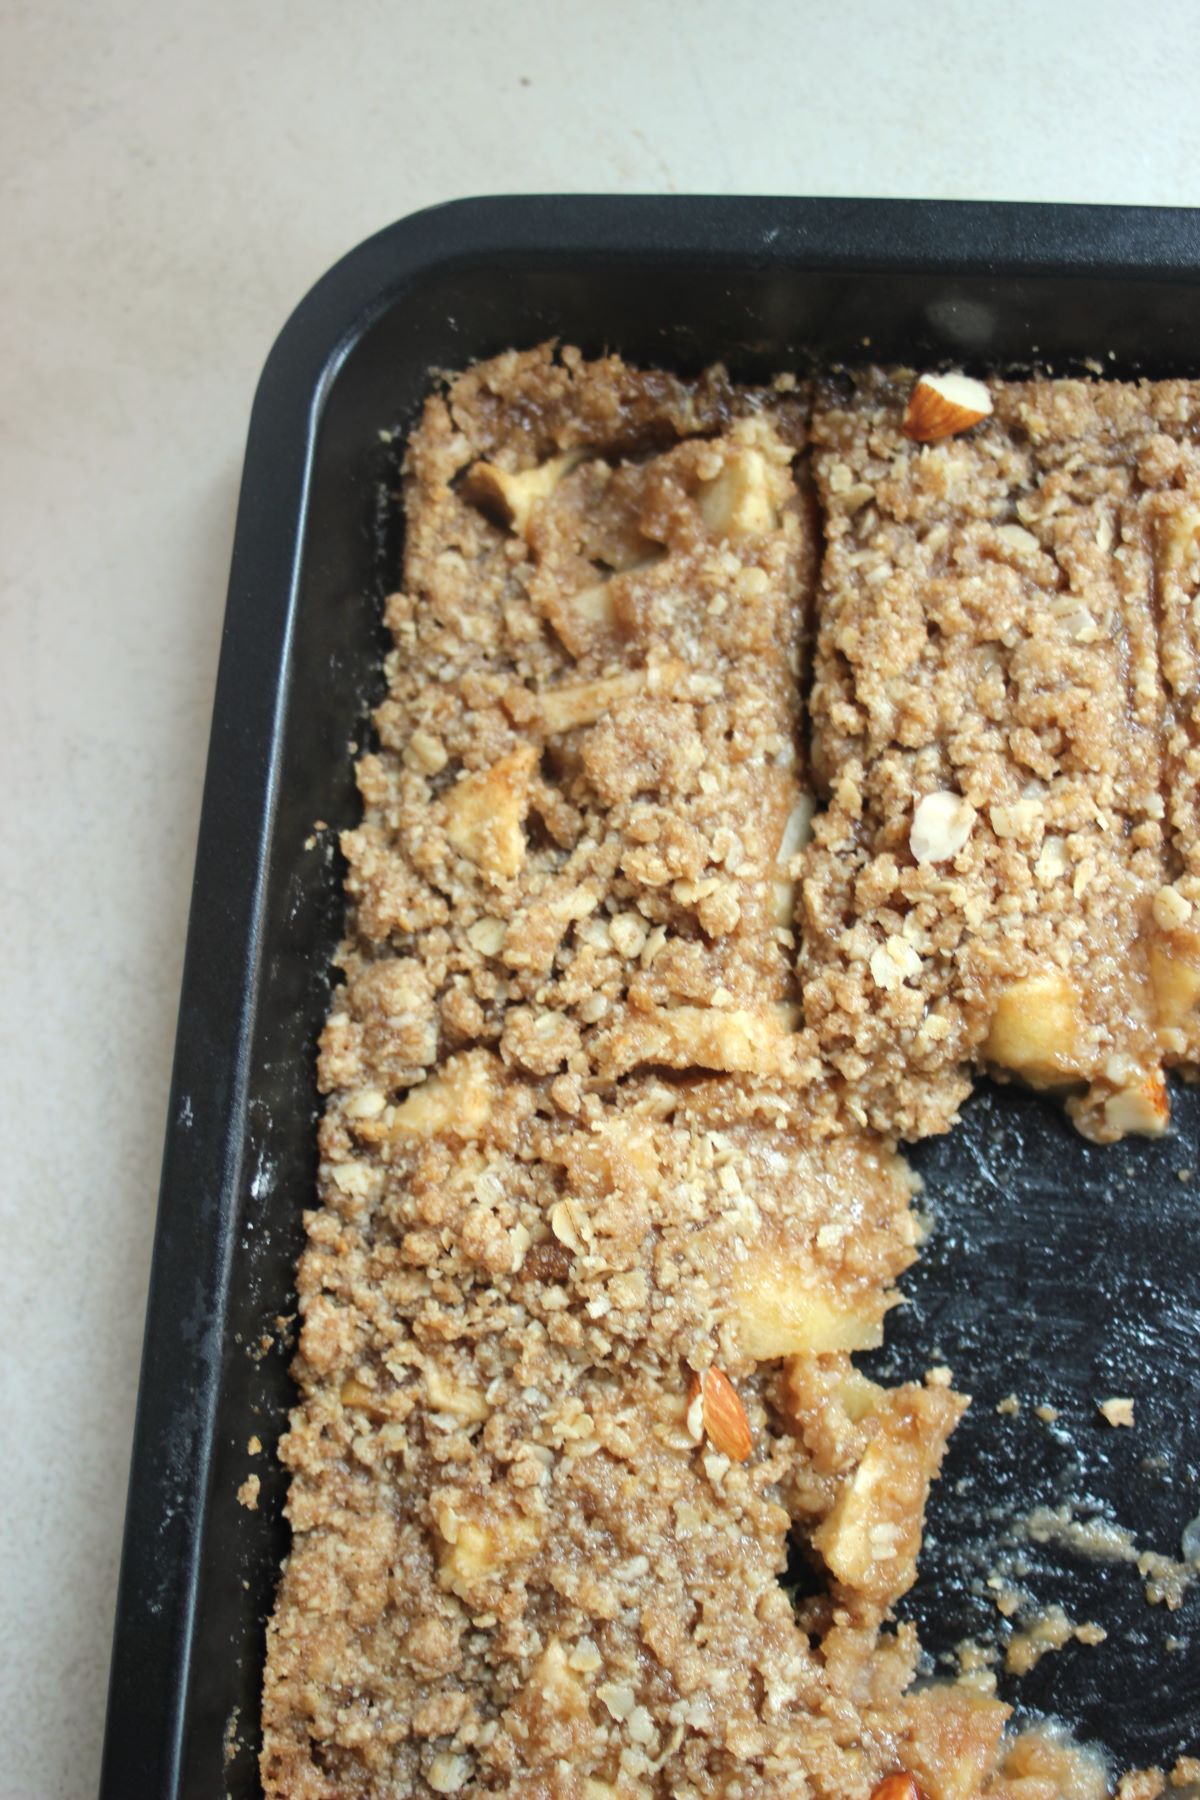 A baking dish with apple crisp seen from above.